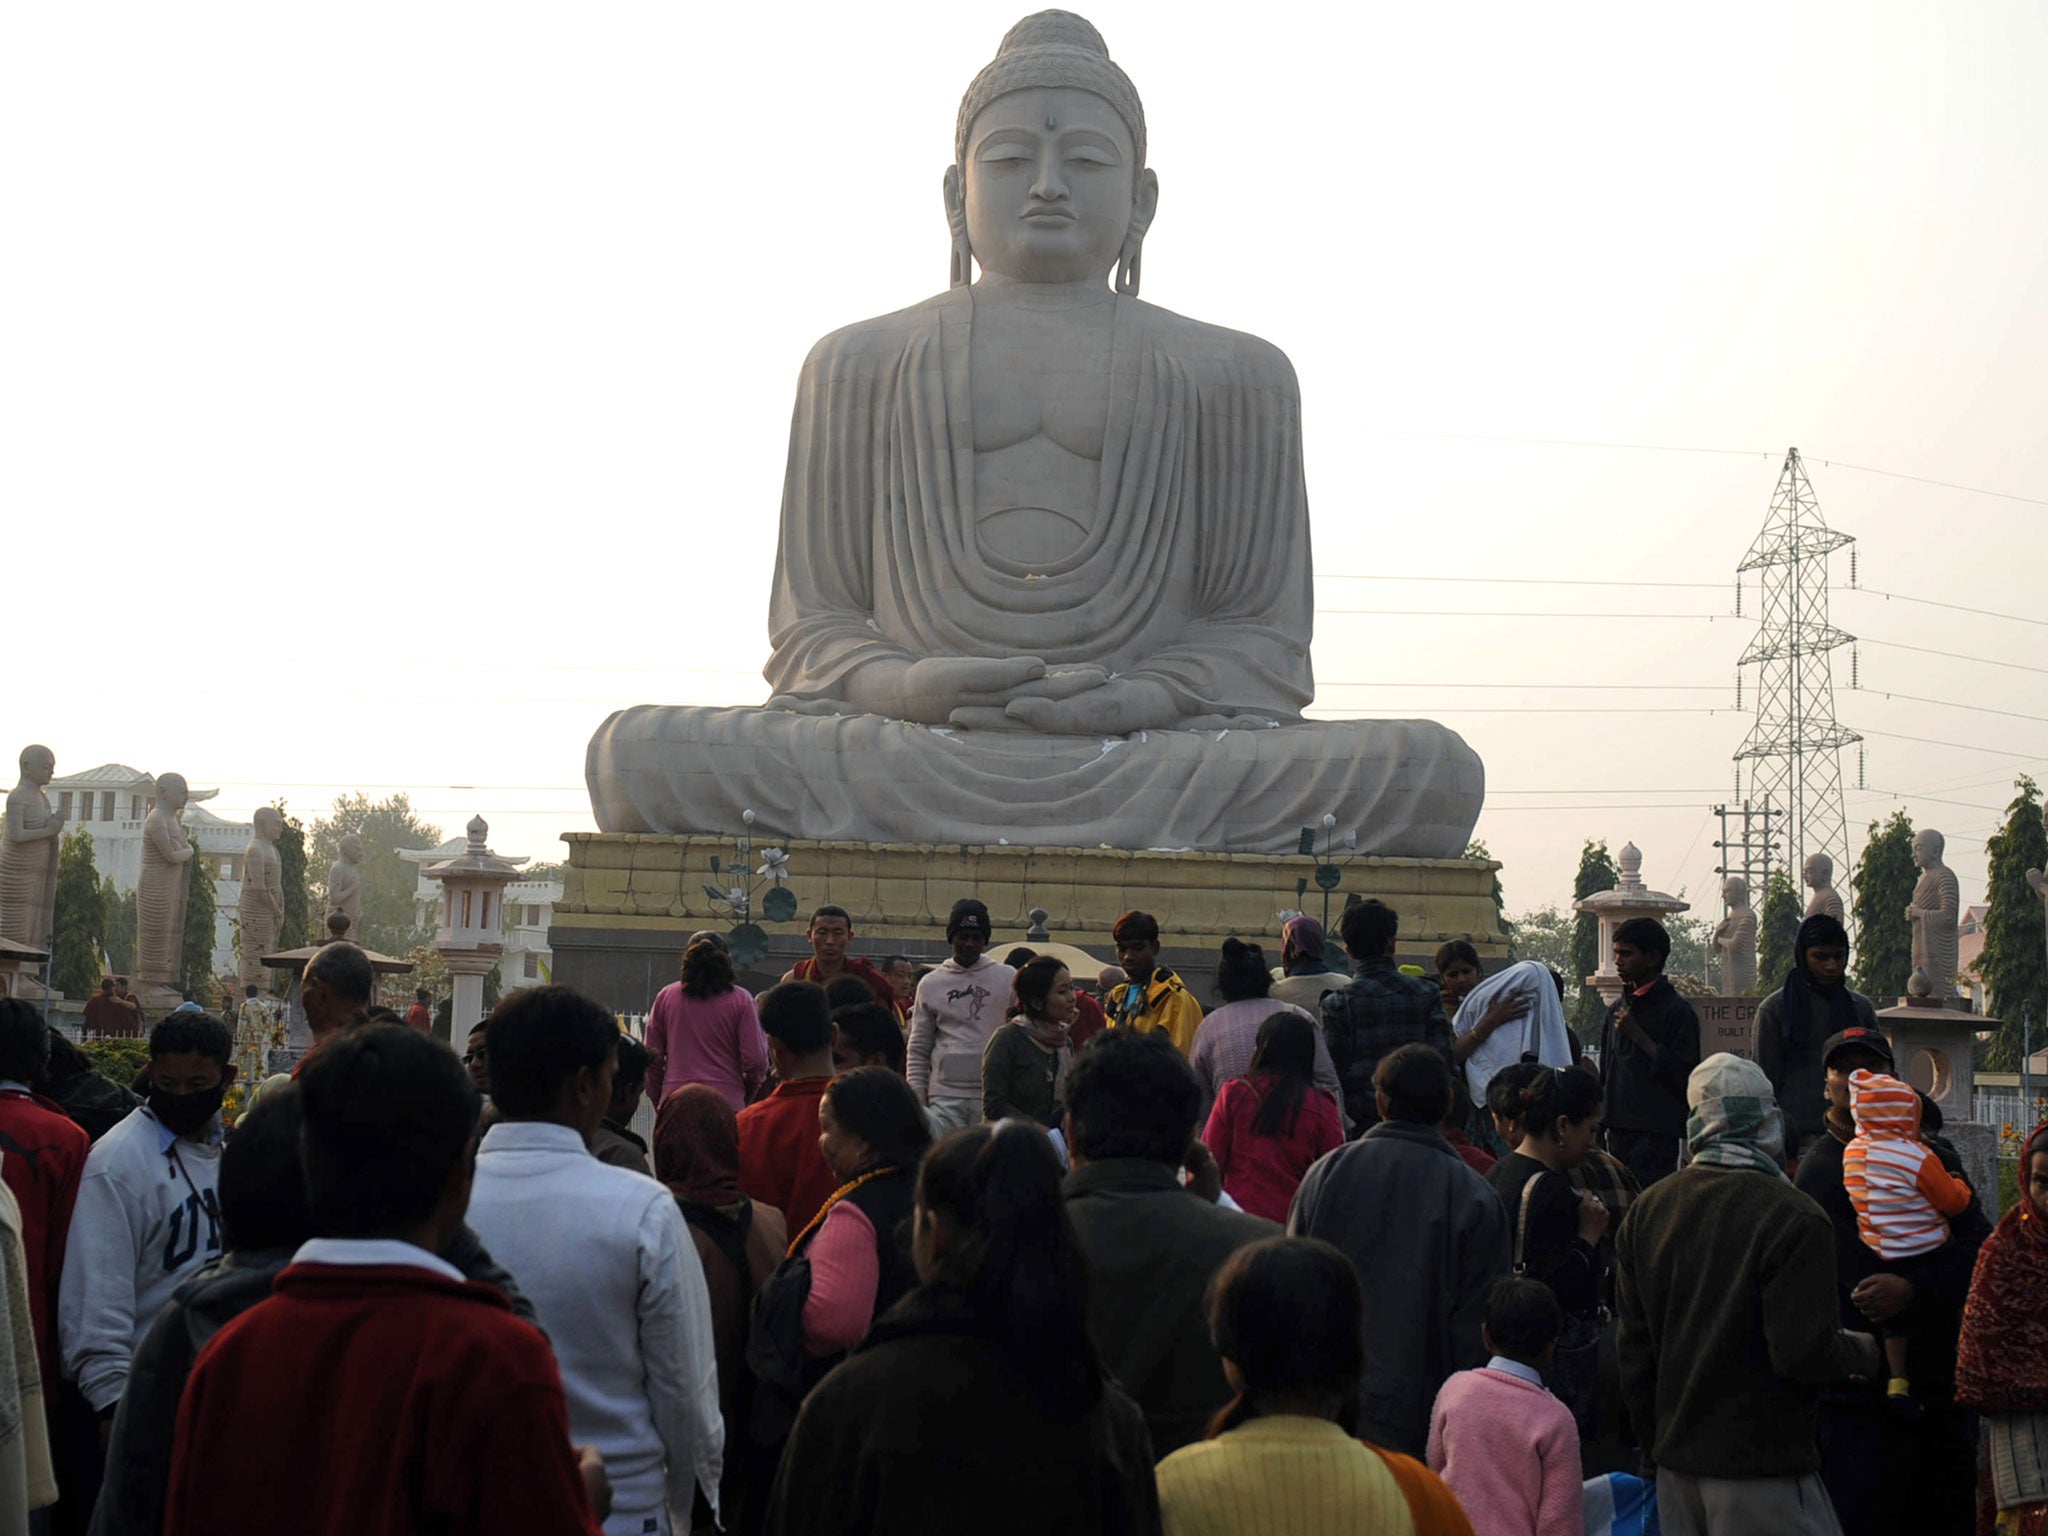 Religious revolutionary: devotees visit the ‘Great Statue of Lord Buddha’ in Bodhgaya, 2010